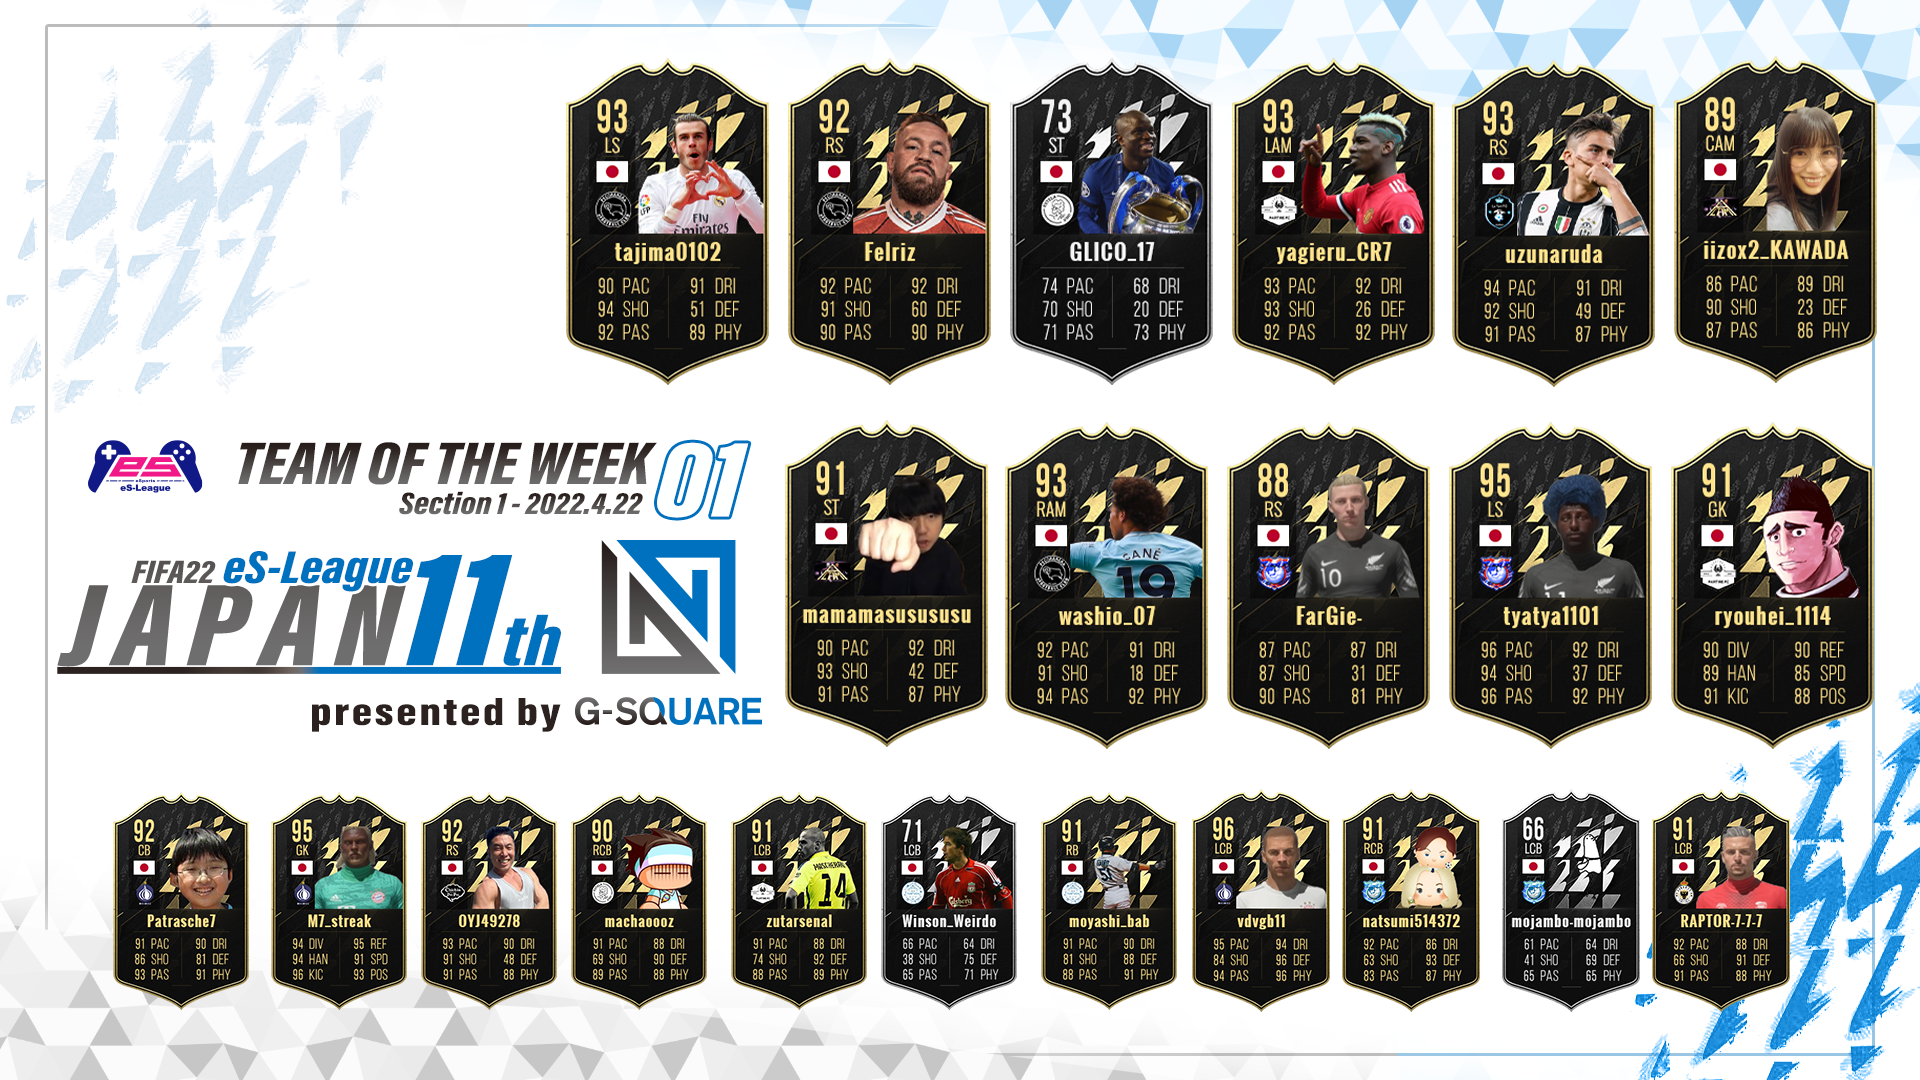 FIFA22 eS-League JAPAN 11th presented by G-SQUARE TOTW01